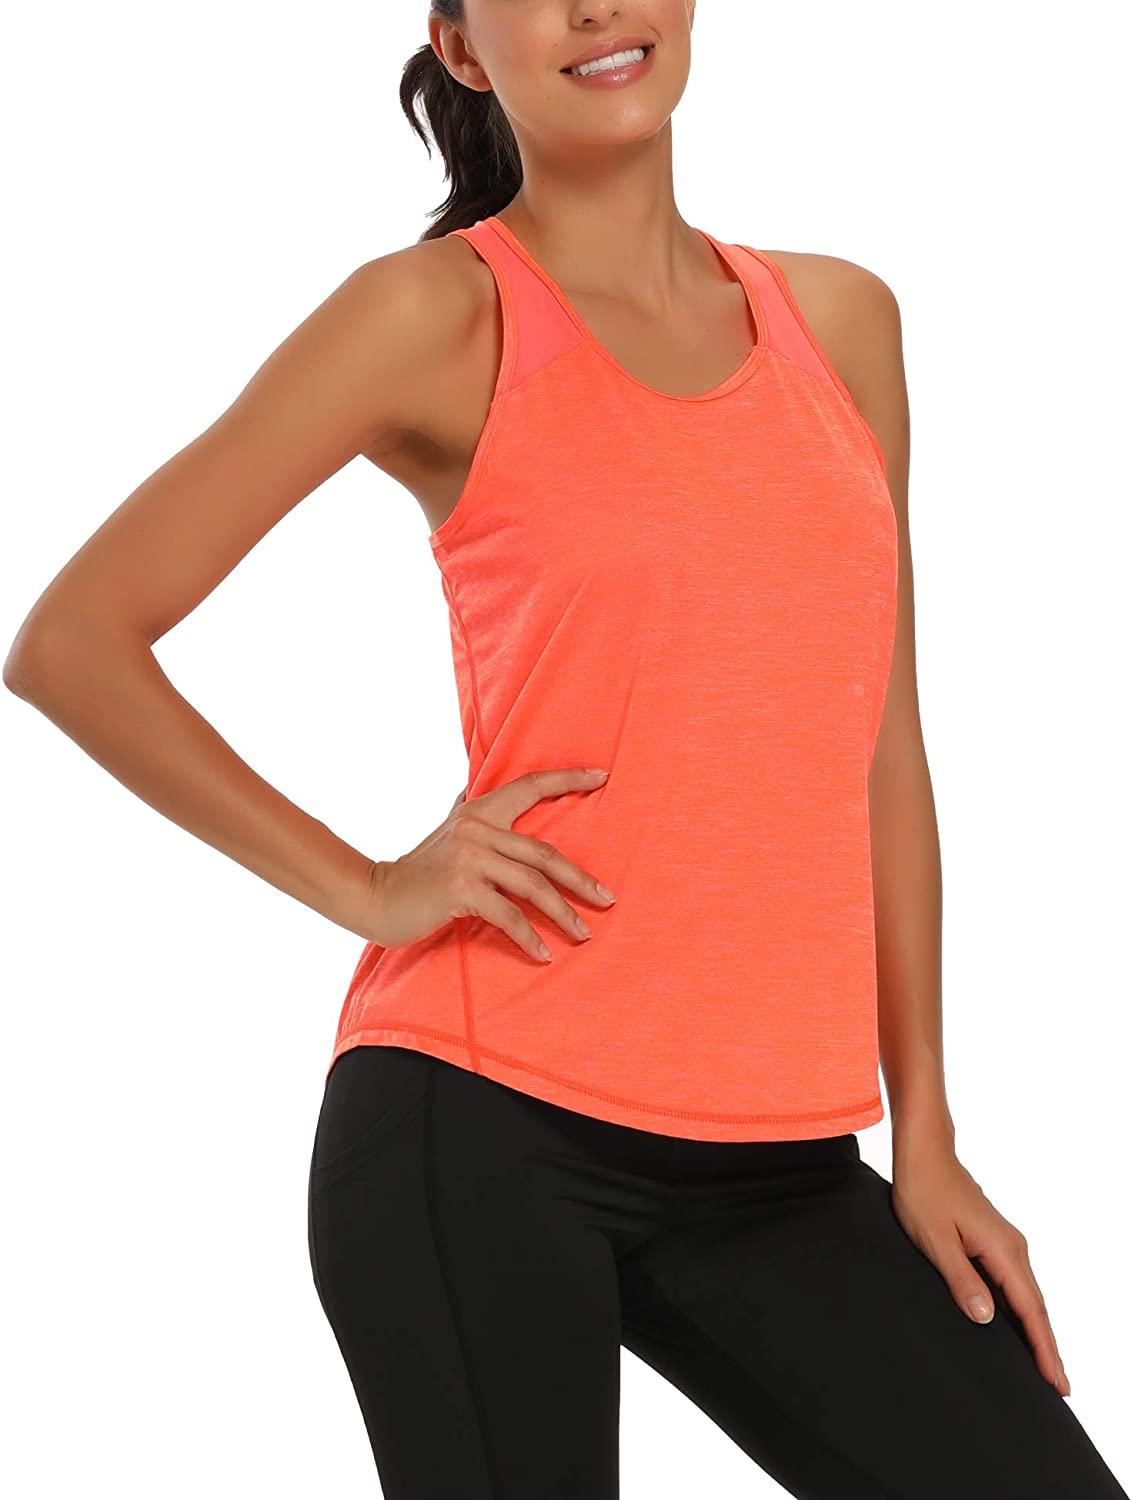 Aeuui Womens Workout Tops for Women Racerback Tank Tops Mesh Yoga Shirts  Athletic Running Tank Tops Sleeveless Gym Clothes Orange Small